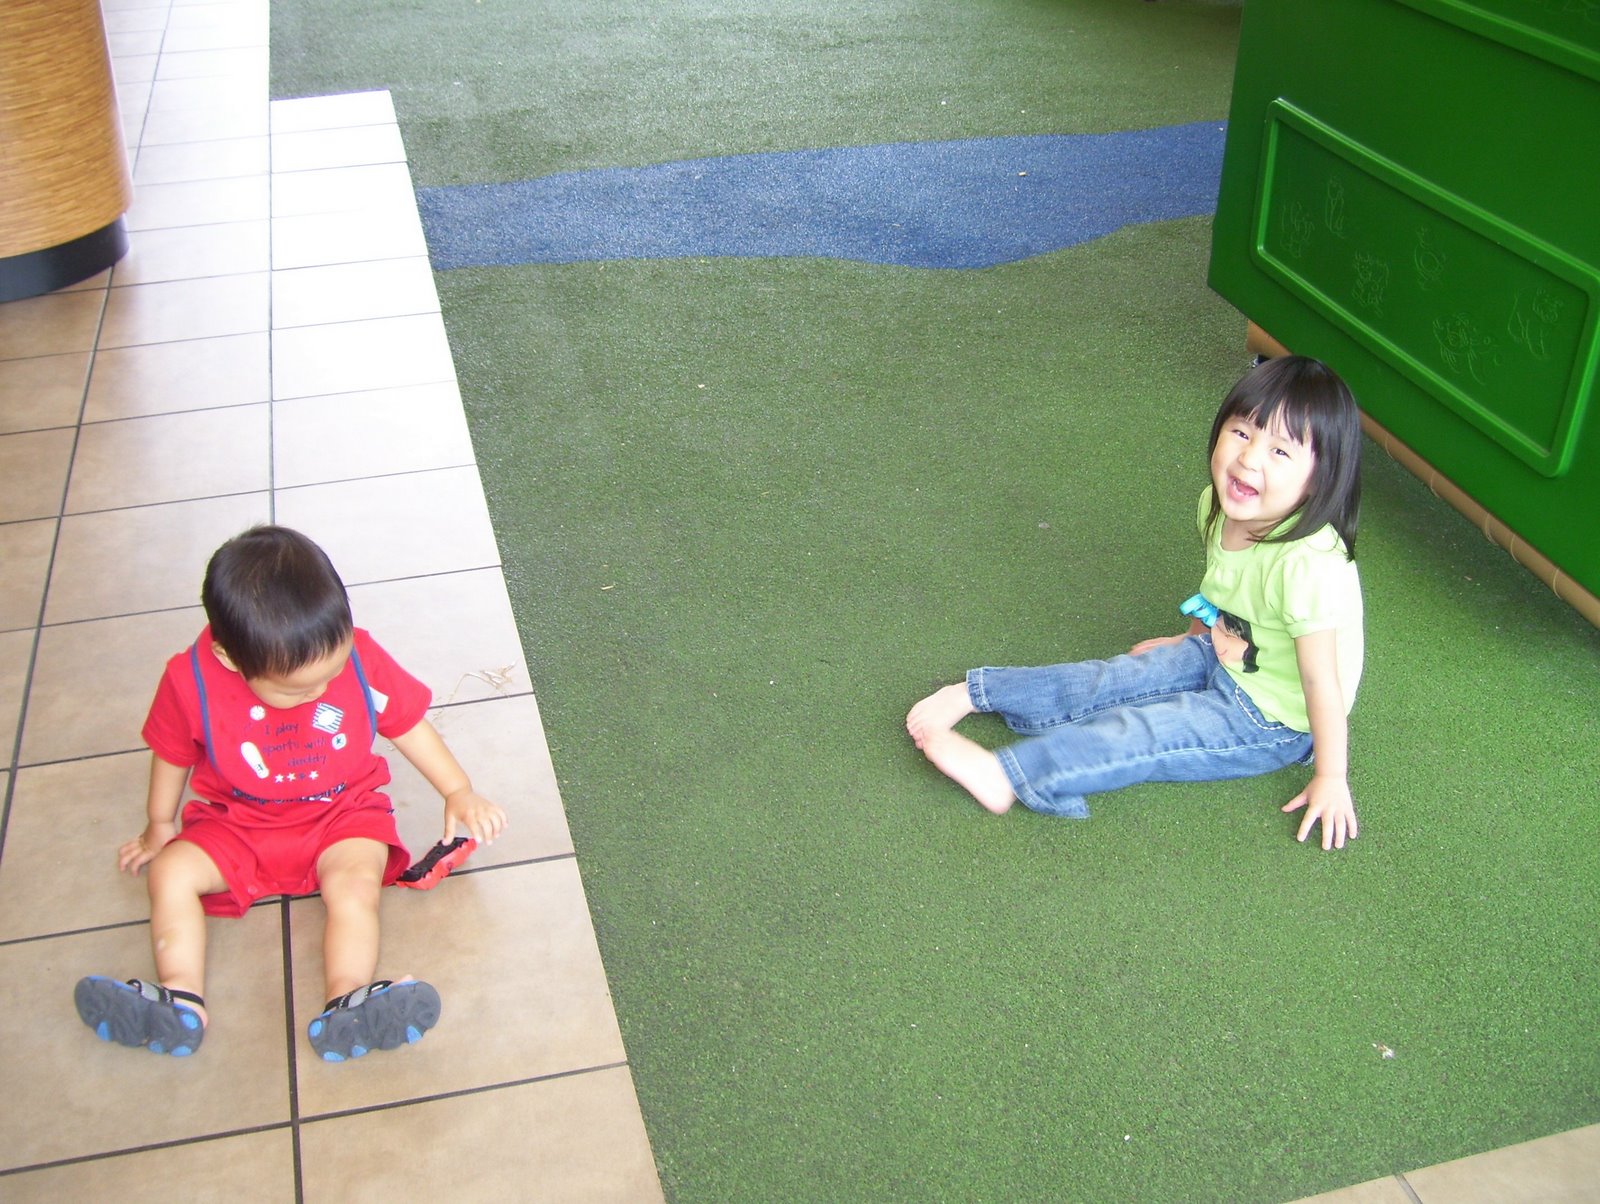 [jayden+and+zoey+playing.jpg]